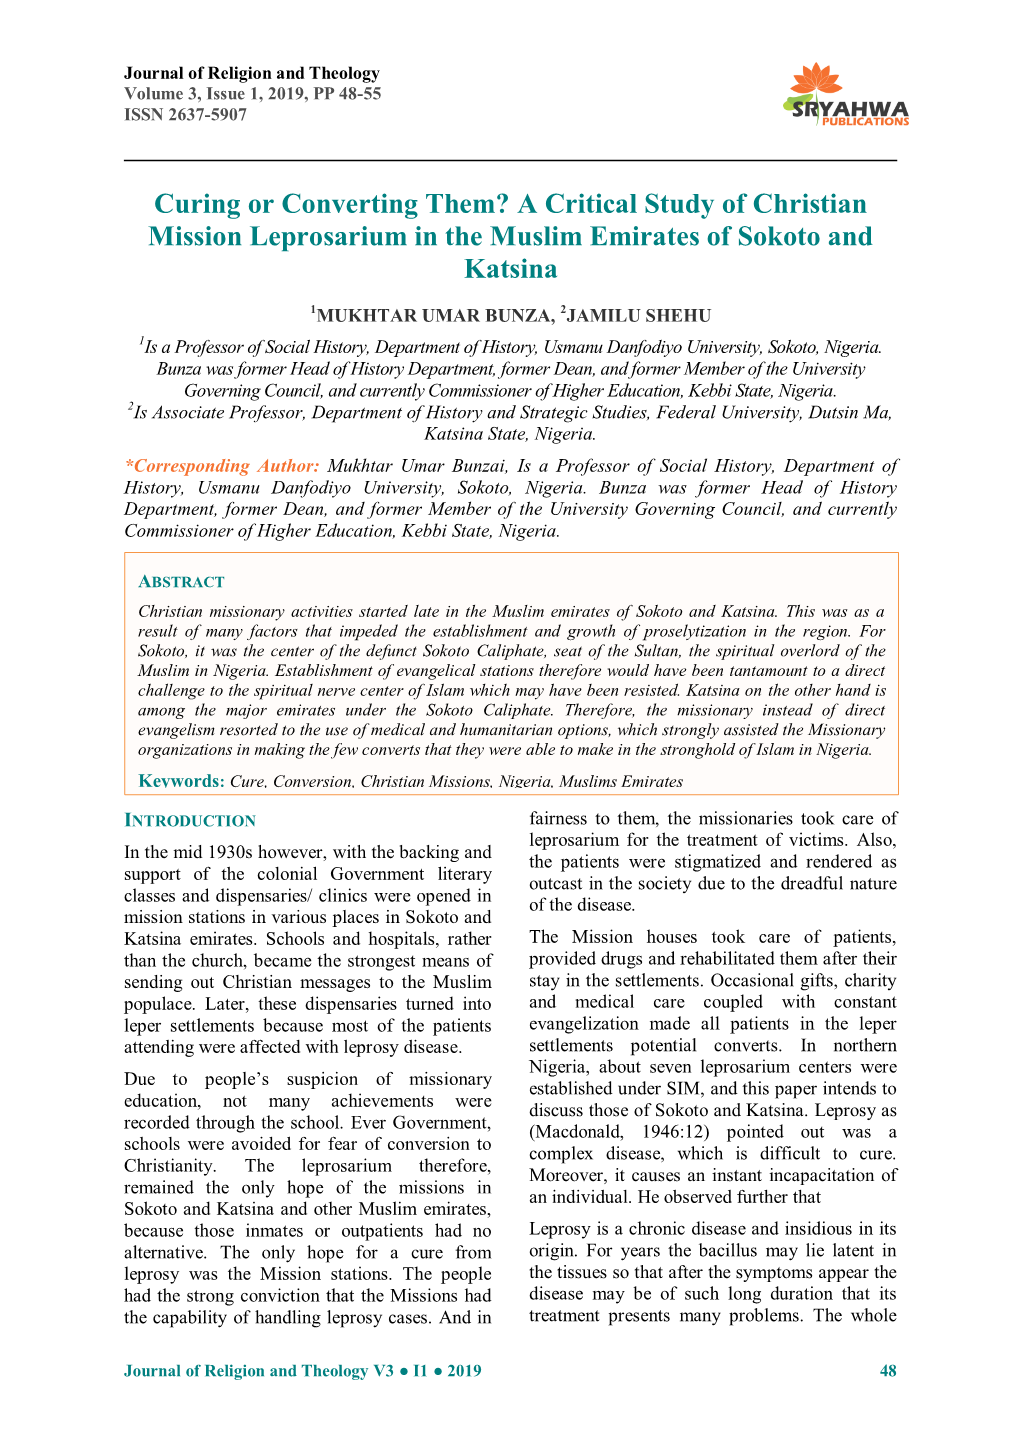 A Critical Study of Christian Mission Leprosarium in the Muslim Emirates of Sokoto and Katsina